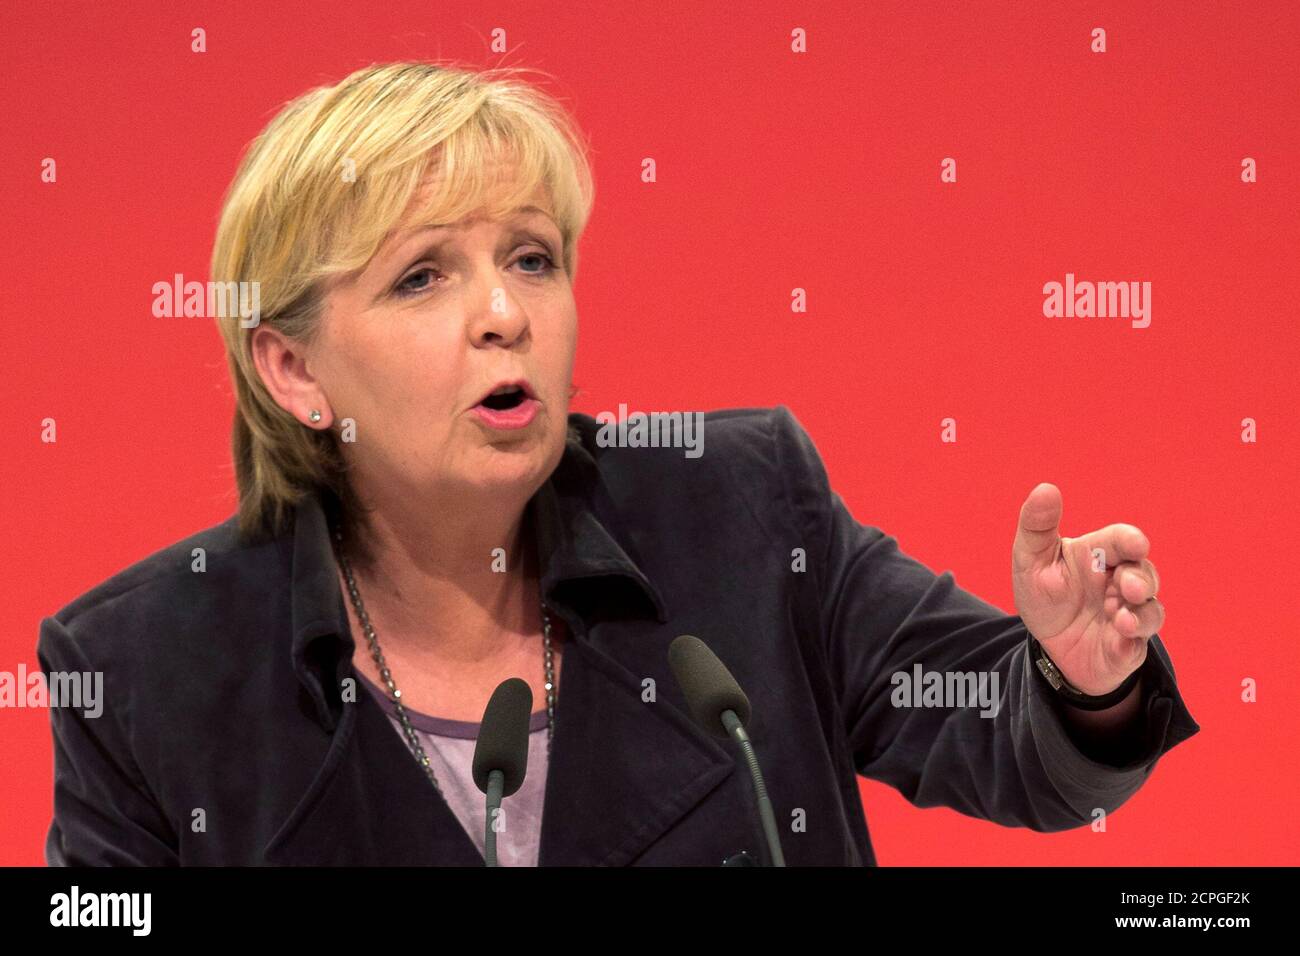 North Rhine-Westphalia State Premier and leading member of the Social Democratic Party (SPD) Hannelore Kraft speaks during a SPD party congress in Leipzig, November 14, 2013.  REUTERS/Thomas Peter (GERMANY - Tags: POLITICS) Stock Photo